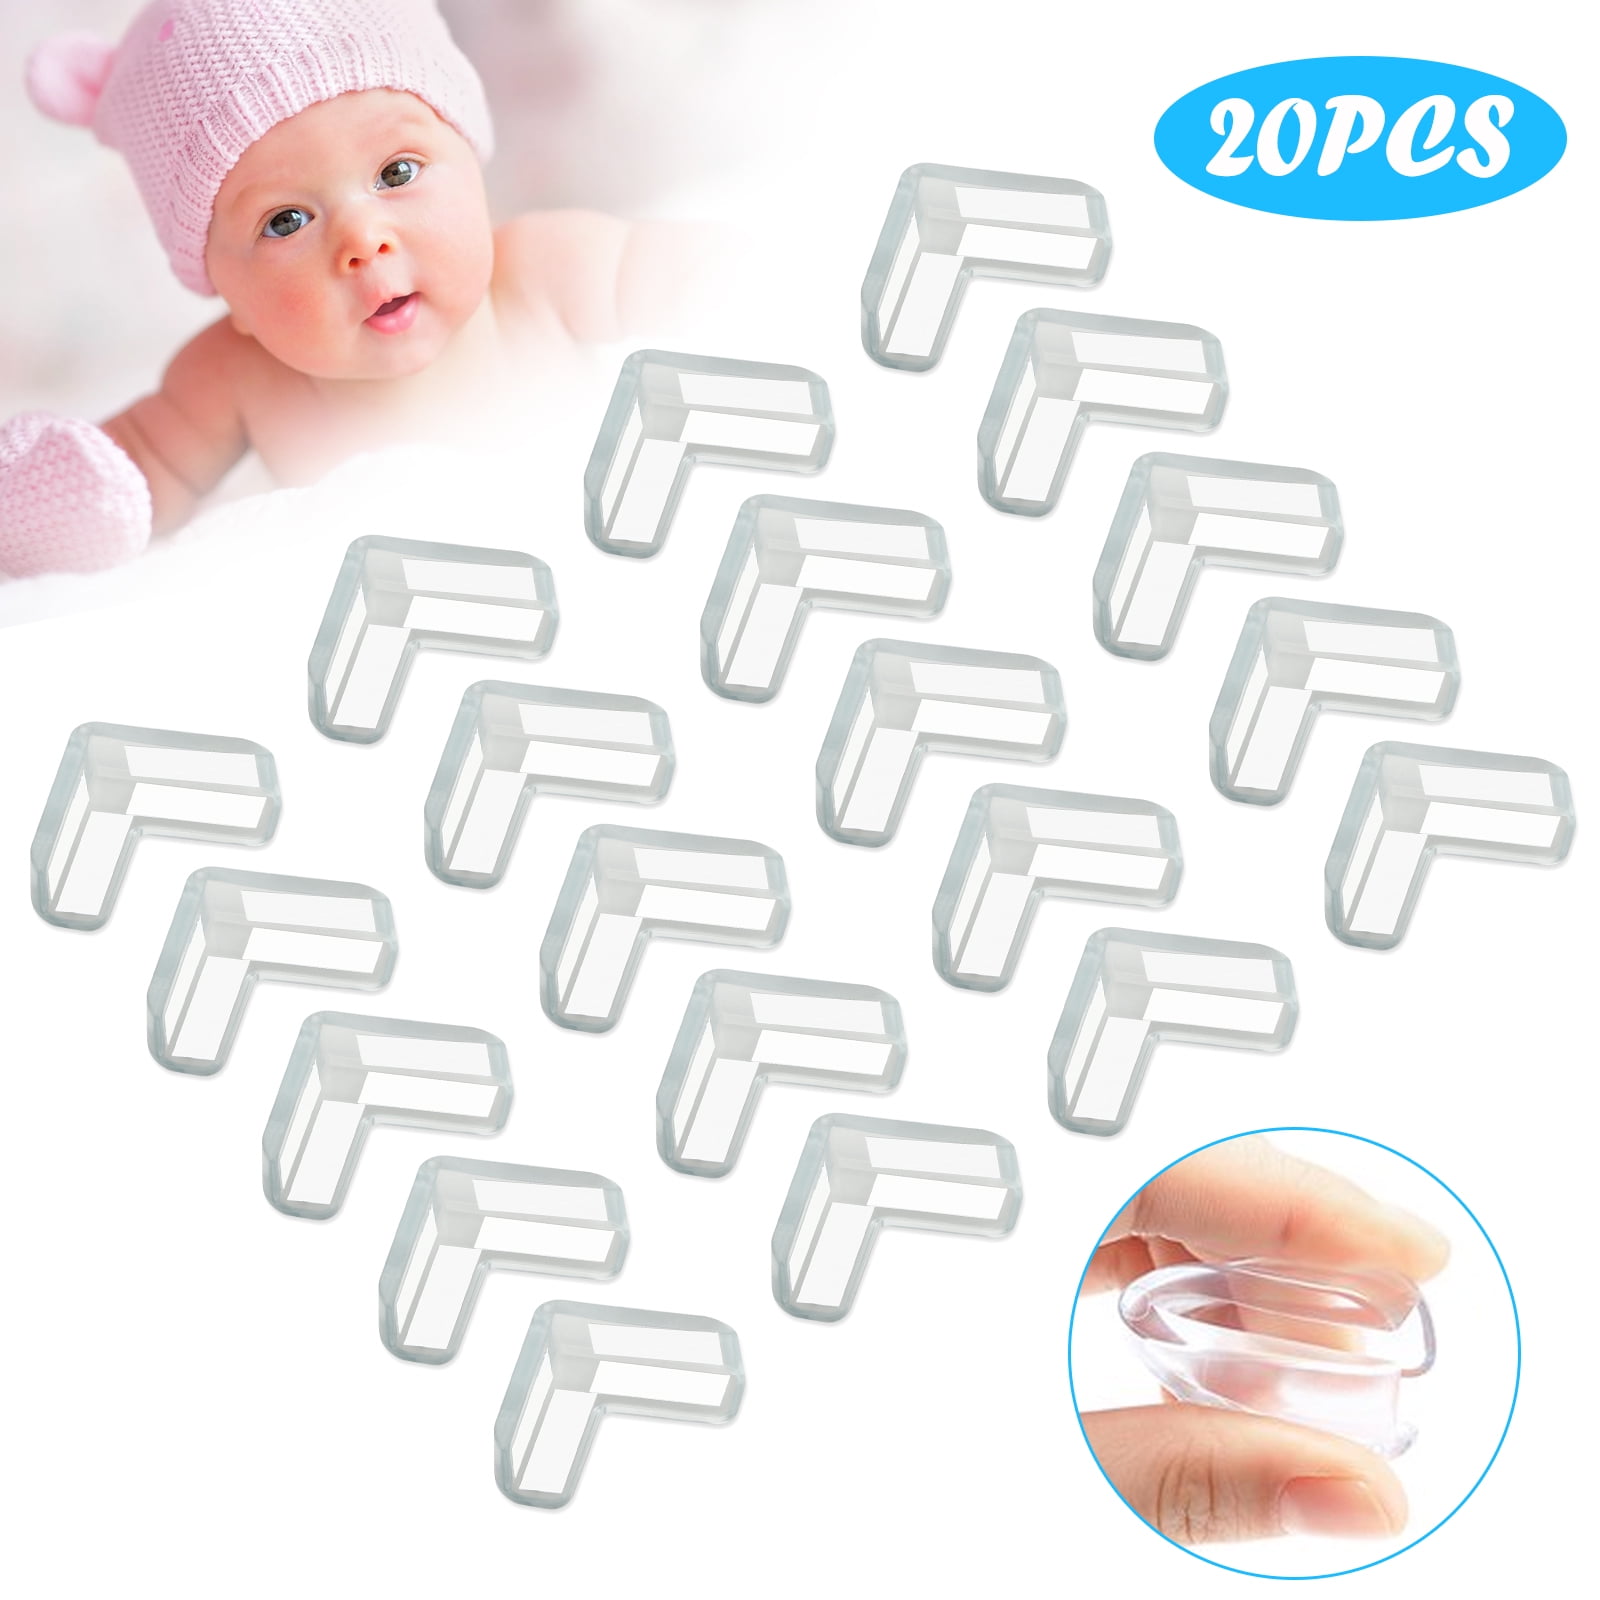 20pcs Baby Kids Safety Desk Table Edge Cushion Cover Protector Corner Guard RF 